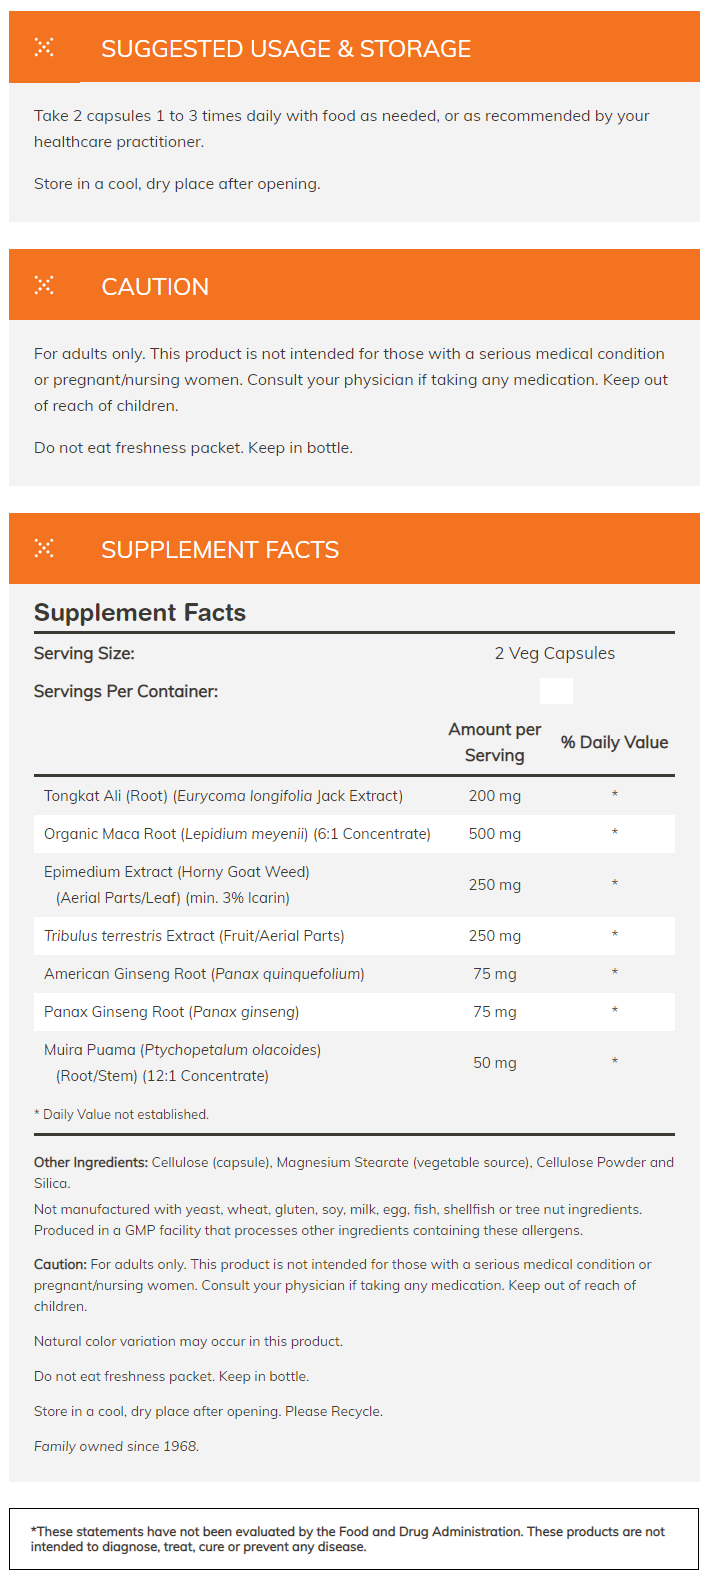 Supplement facts and usage instructions for a health product containing Tongkat Ali, Organic Maca Root, and other ingredients. Not advised for pregnant women.